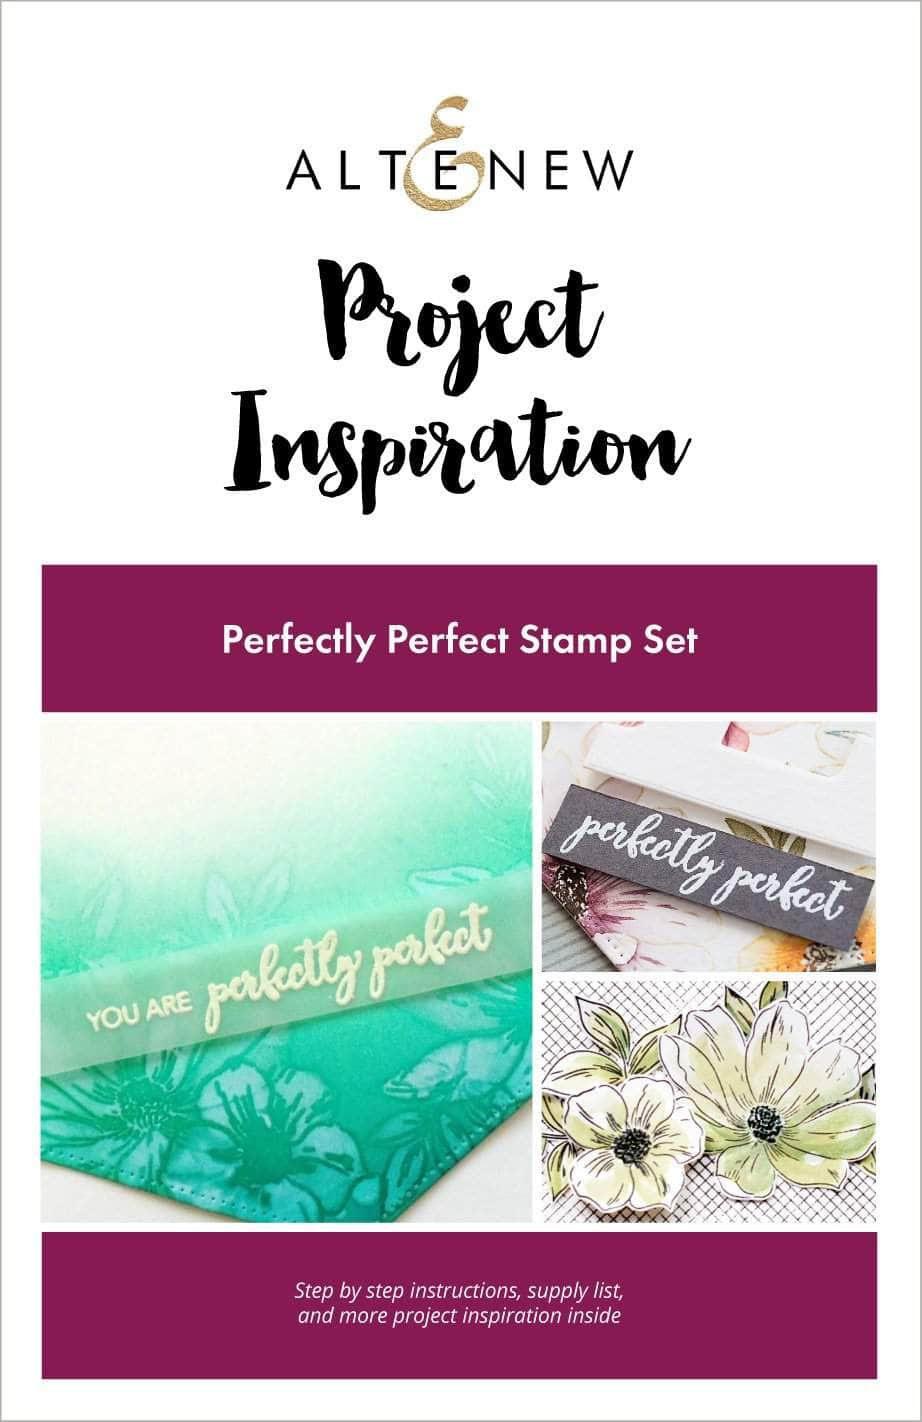 55Printing.com Printed Media Perfectly Perfect Project Inspiration Guide